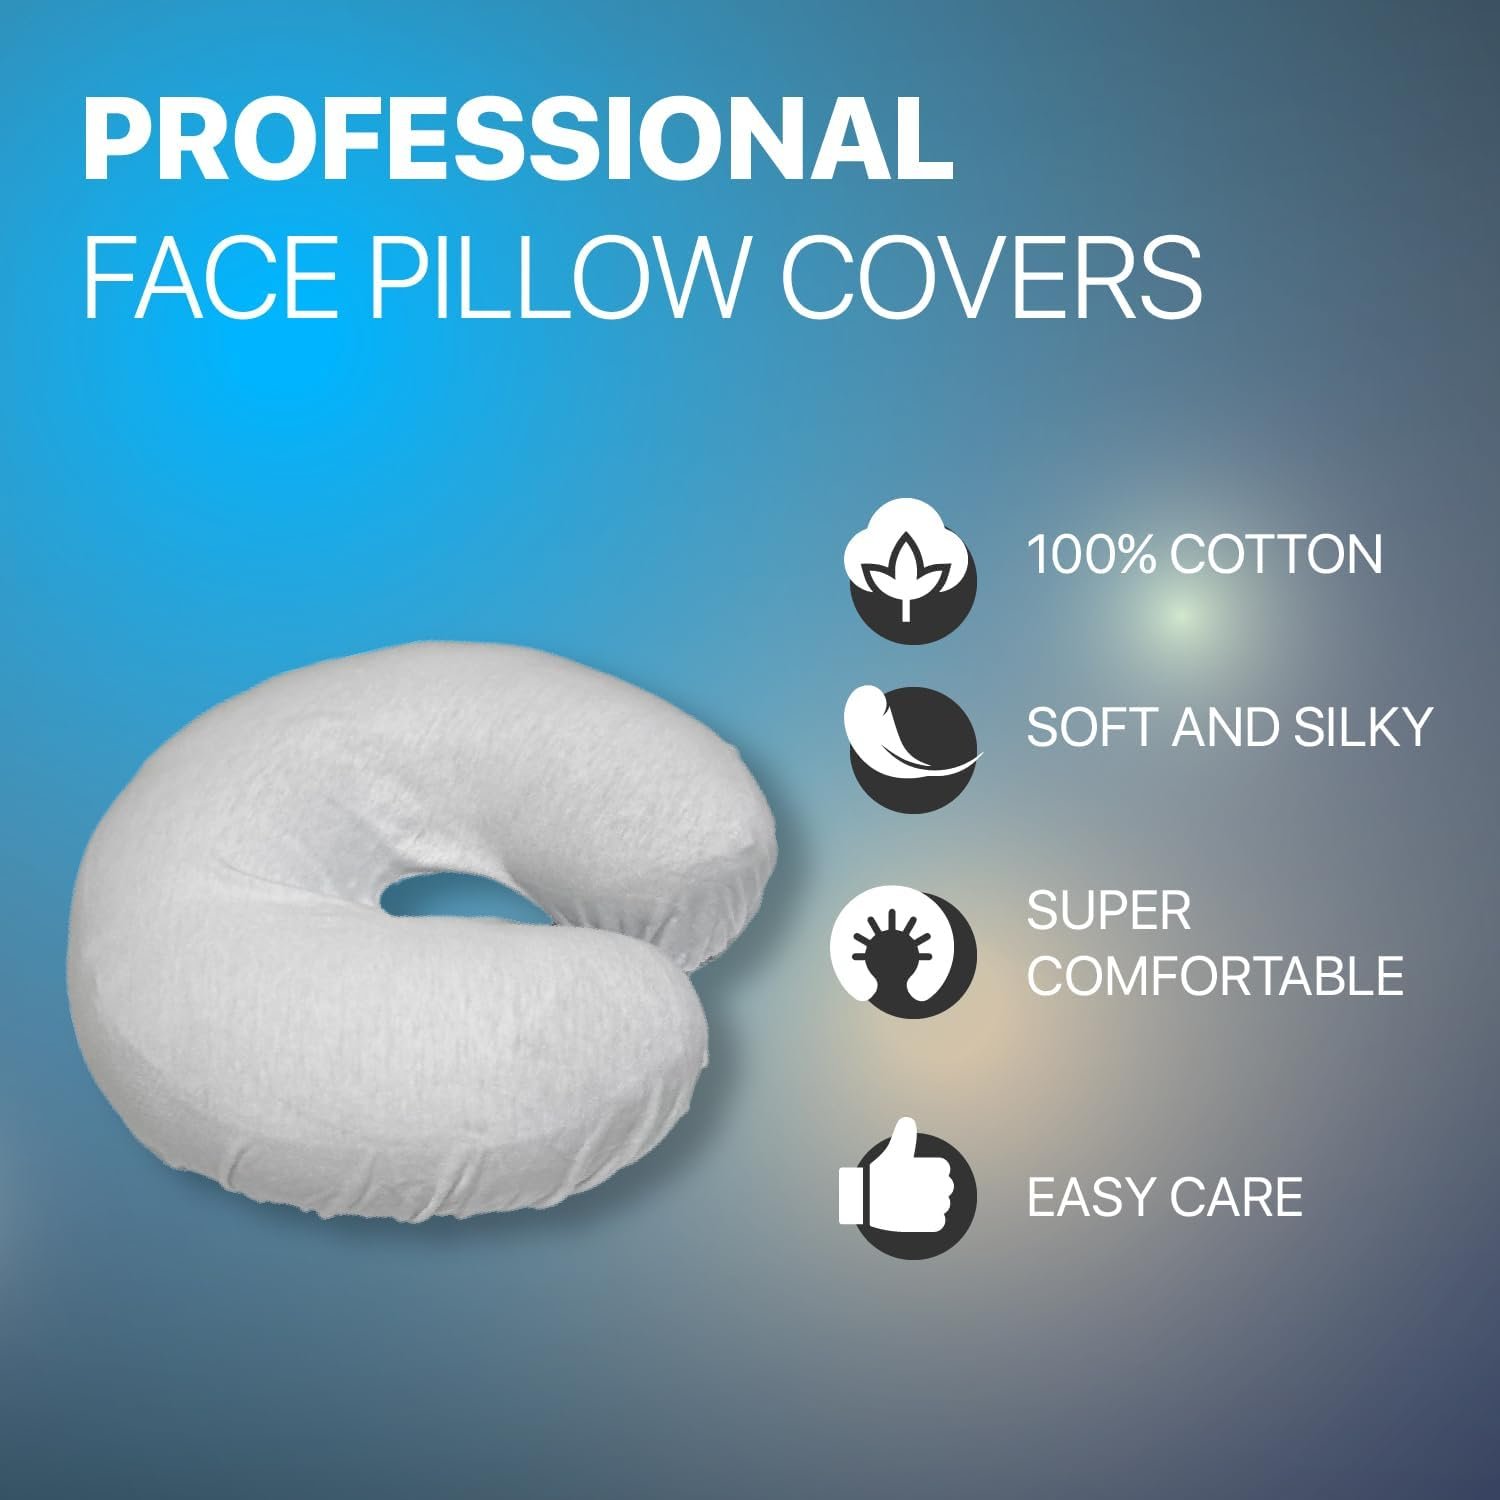 Massage Face Rest Cradle Cover by Acuforce | Patented Face Pillow Covers | 100% Cotton  Seamless | Crescent Cover Fits Massage Table  Chair Cushions (3 Pack, White)